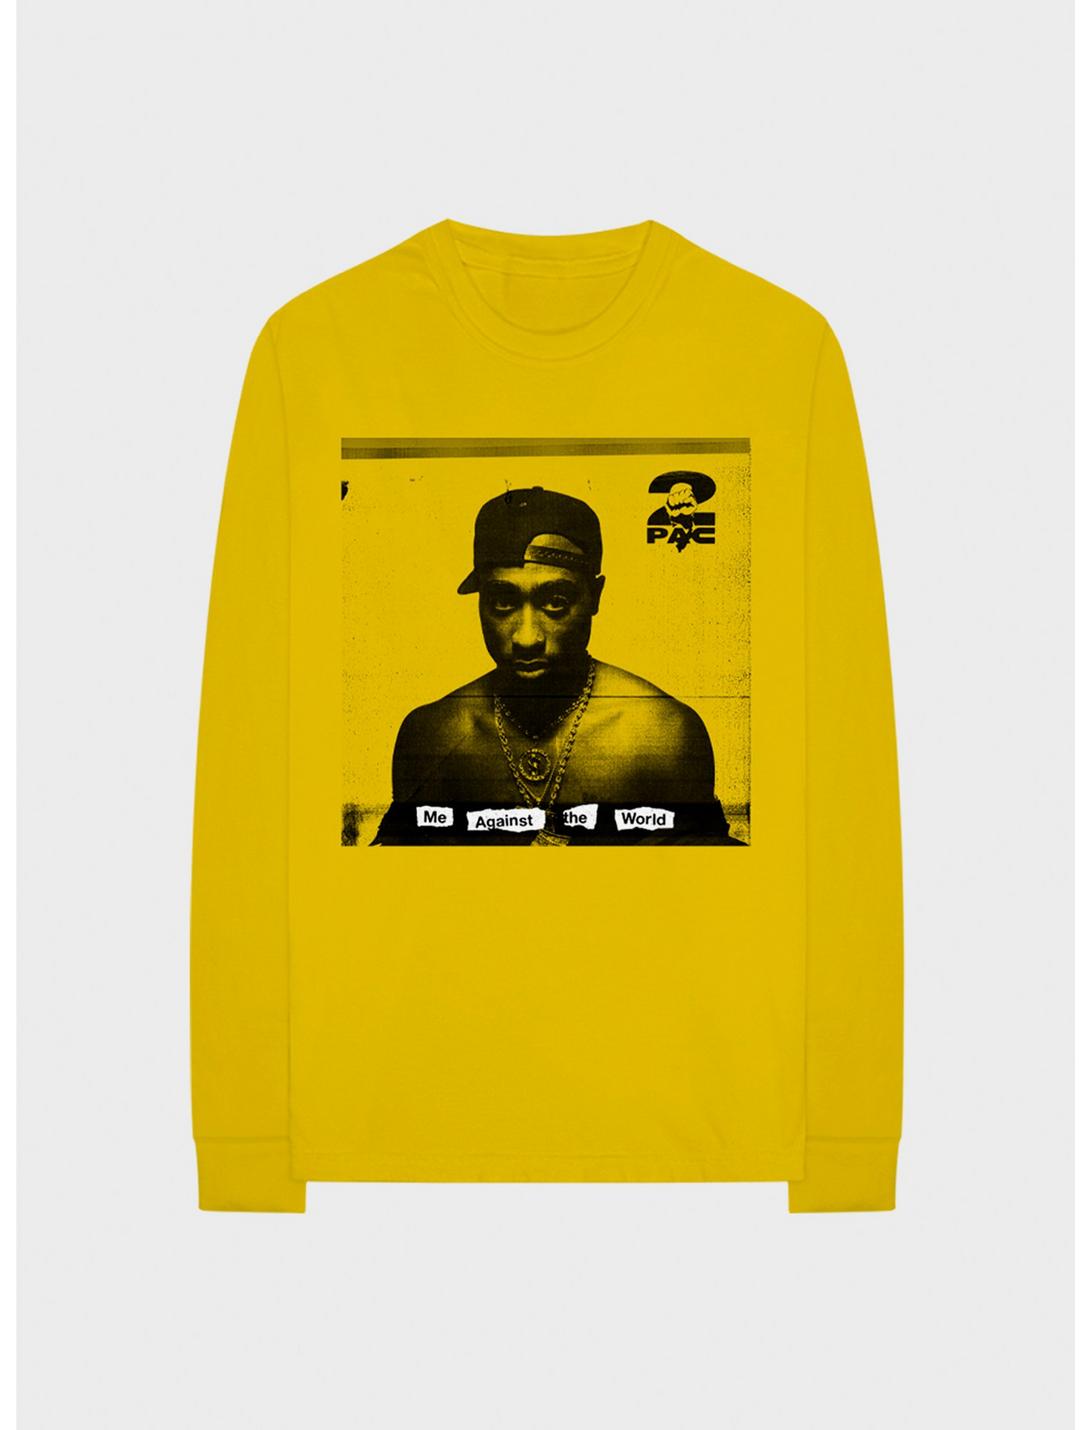 Tupac Me Against The World Portrait Long-Sleeve T-Shirt, YELLOW, hi-res